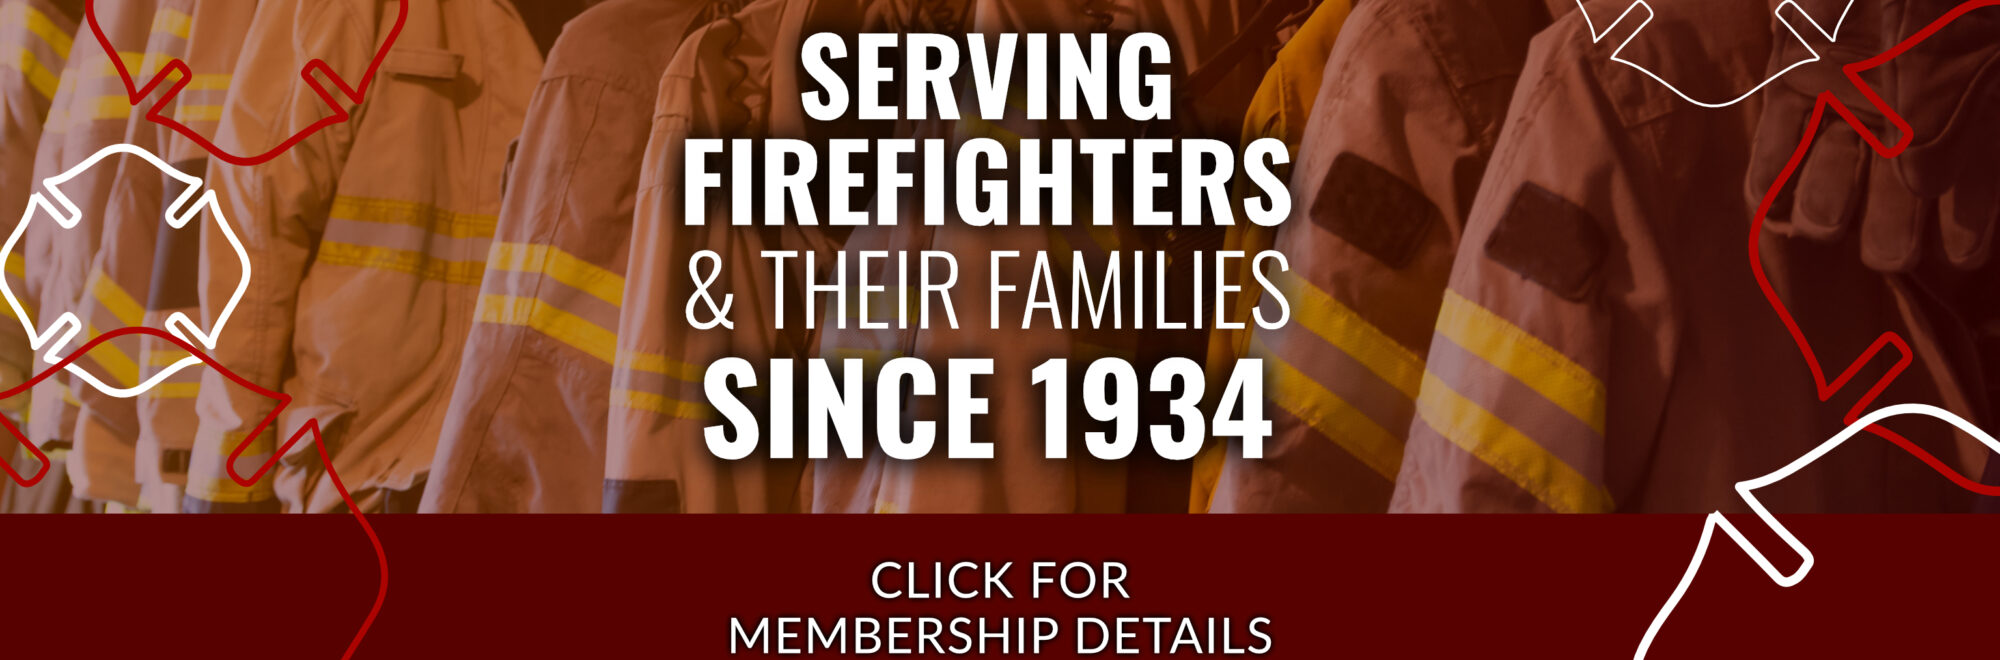 Serving Firefighters and Their Families Since 1934. Get membership details.